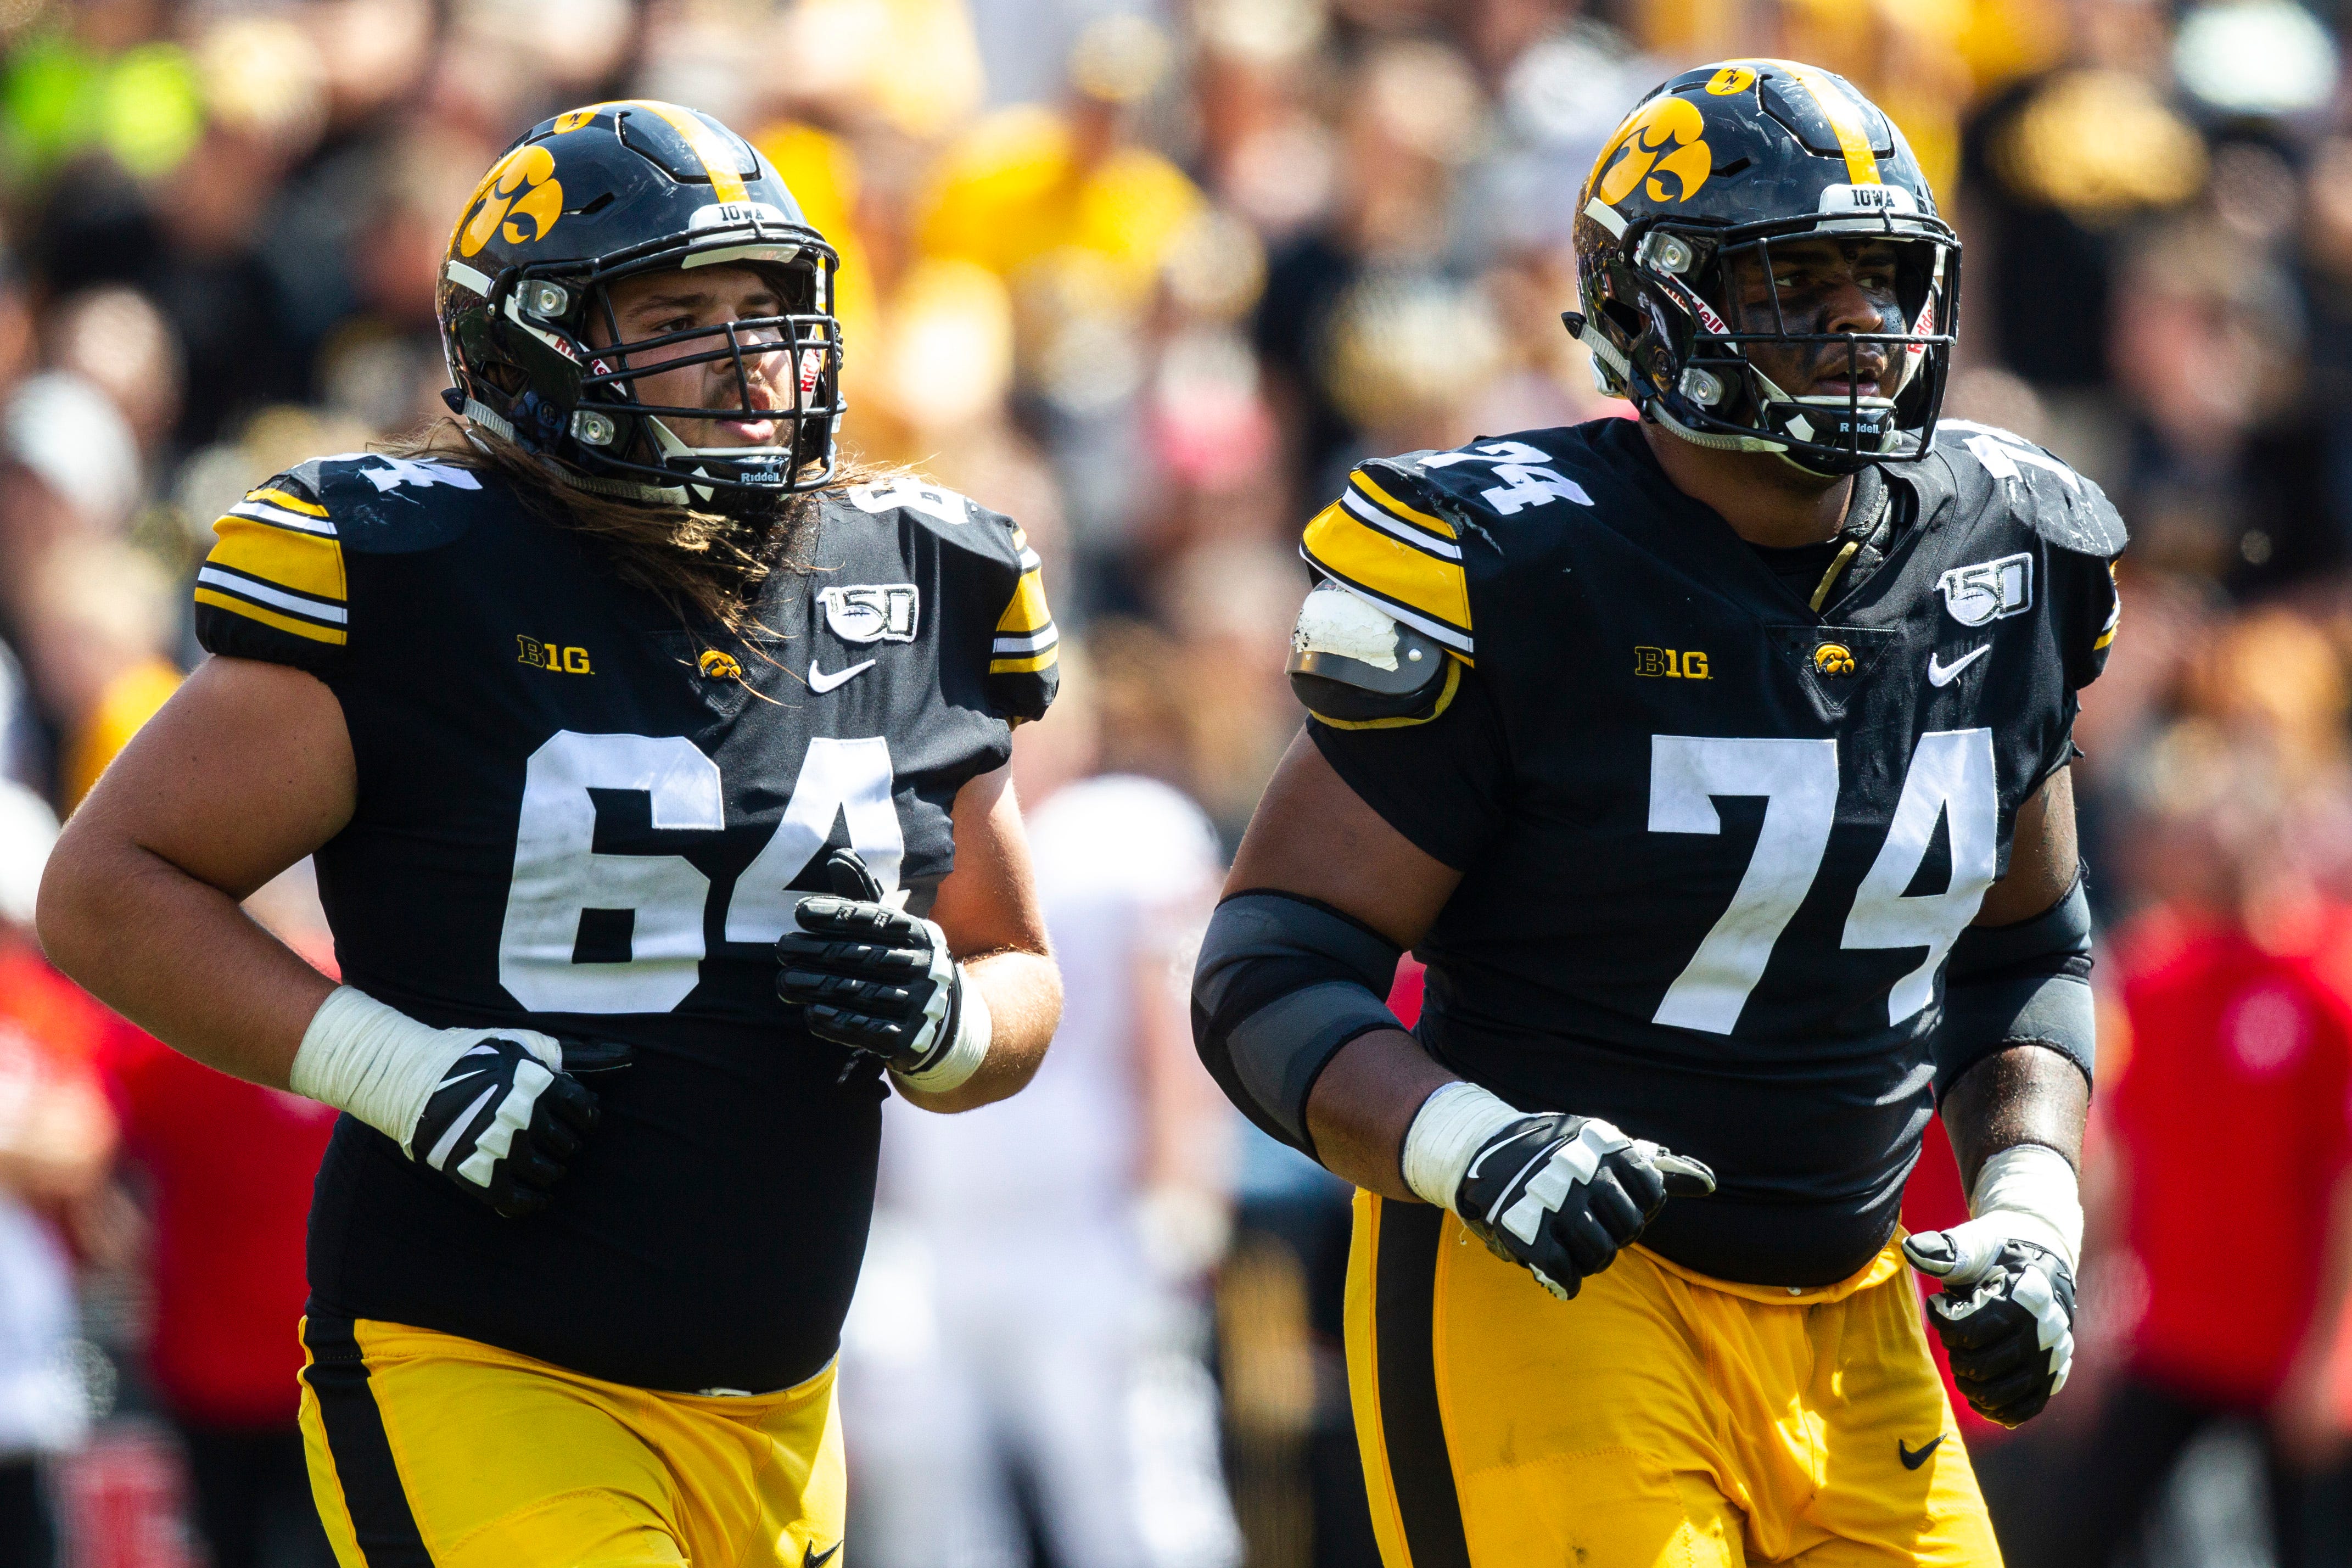 Iowa offensive lineman Kyler Schott (64) and Tristan Wirfs (74) run to the sideline during a NCAA Big Ten Conference football game against Rutgers, Saturday, Sept. 7, 2019, at Kinnick Stadium in Iowa City, Iowa.